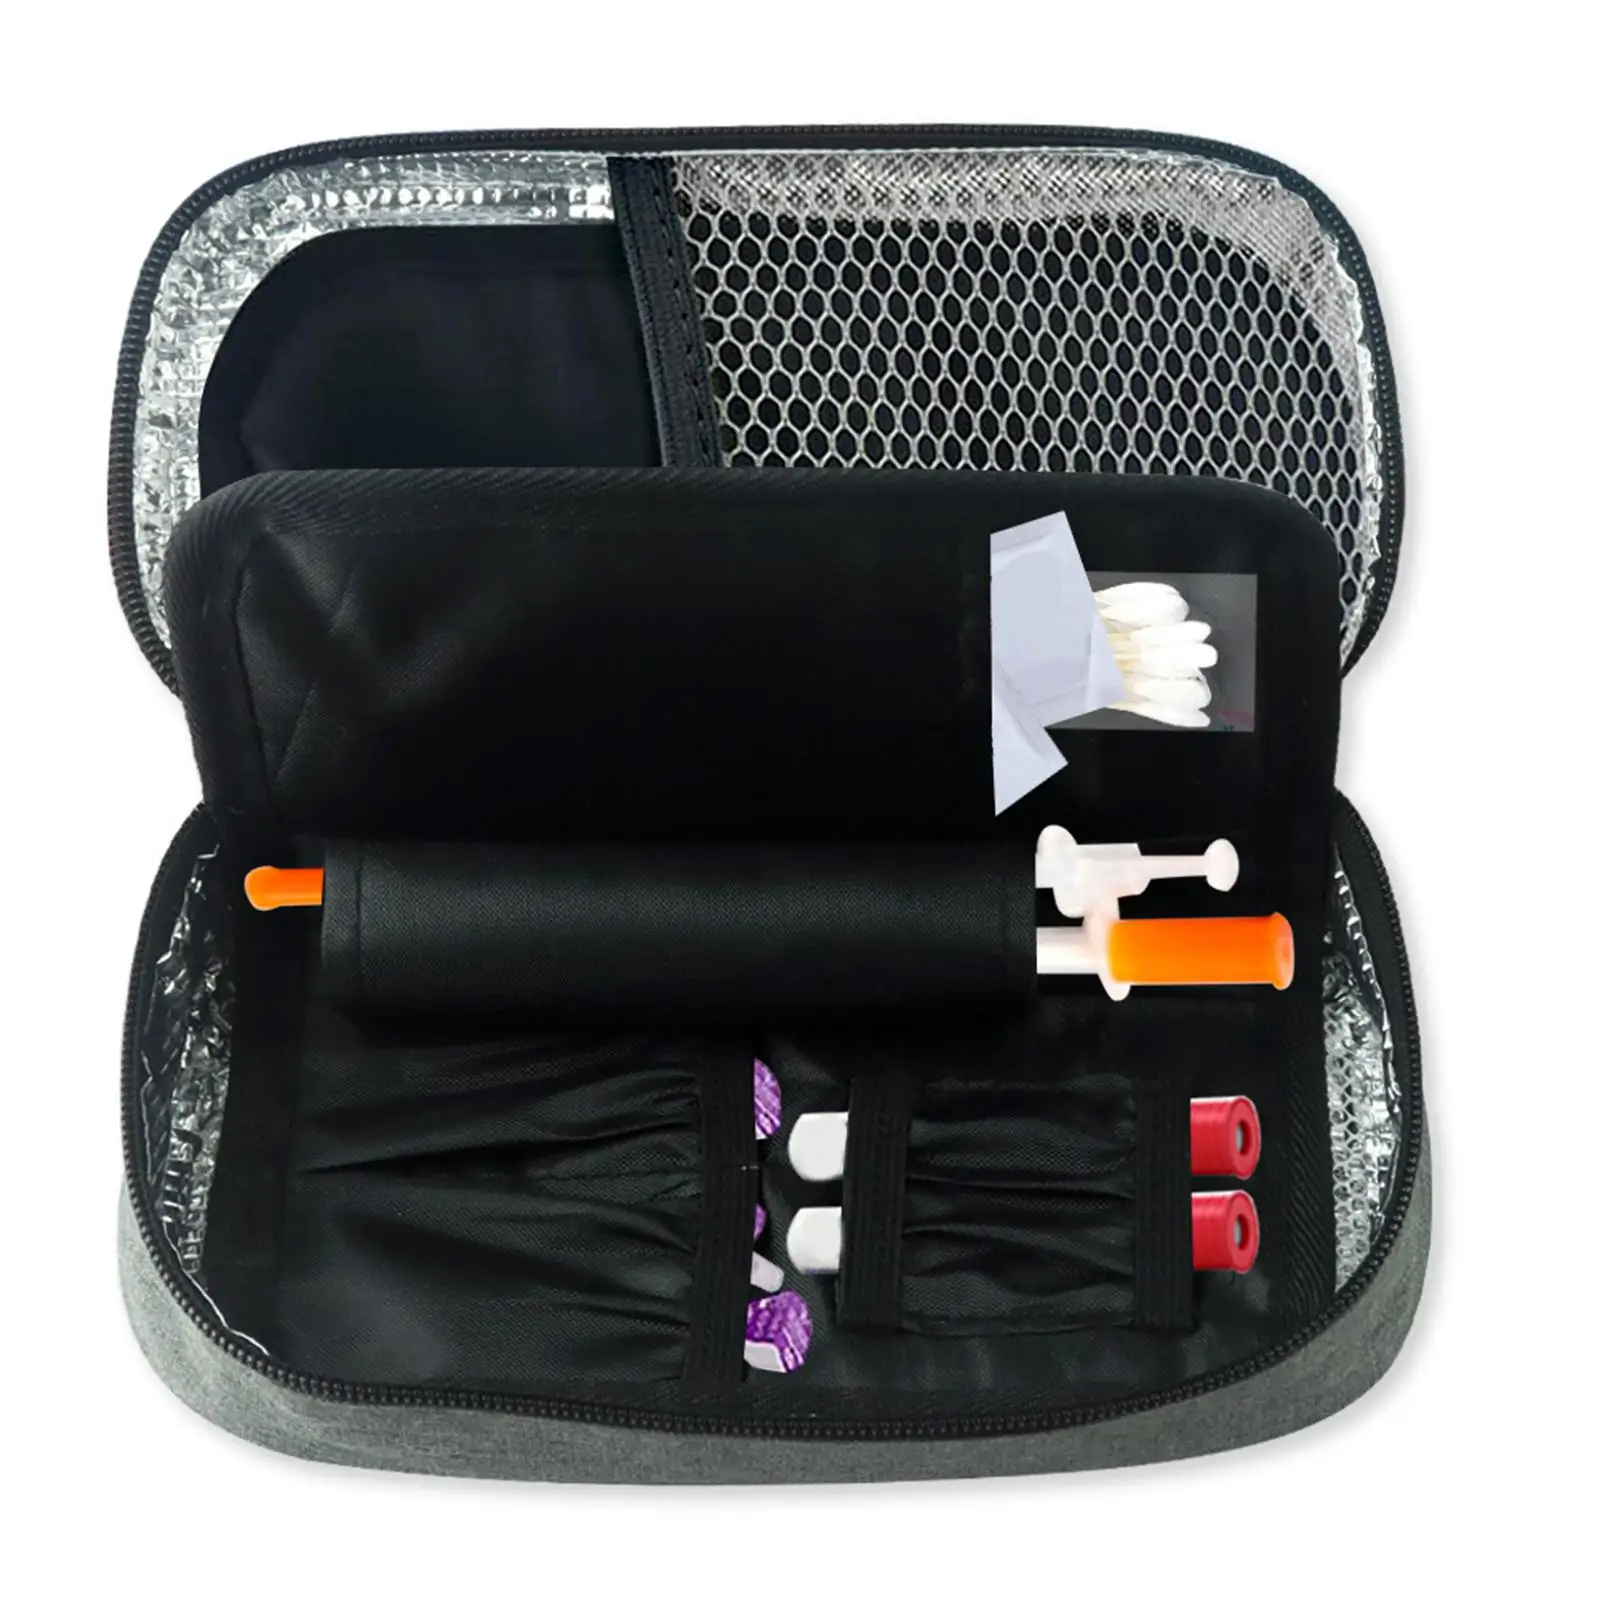 Reusable Cooler Travel Case with Detachable Pouch Protector Organizer Cooling Bag